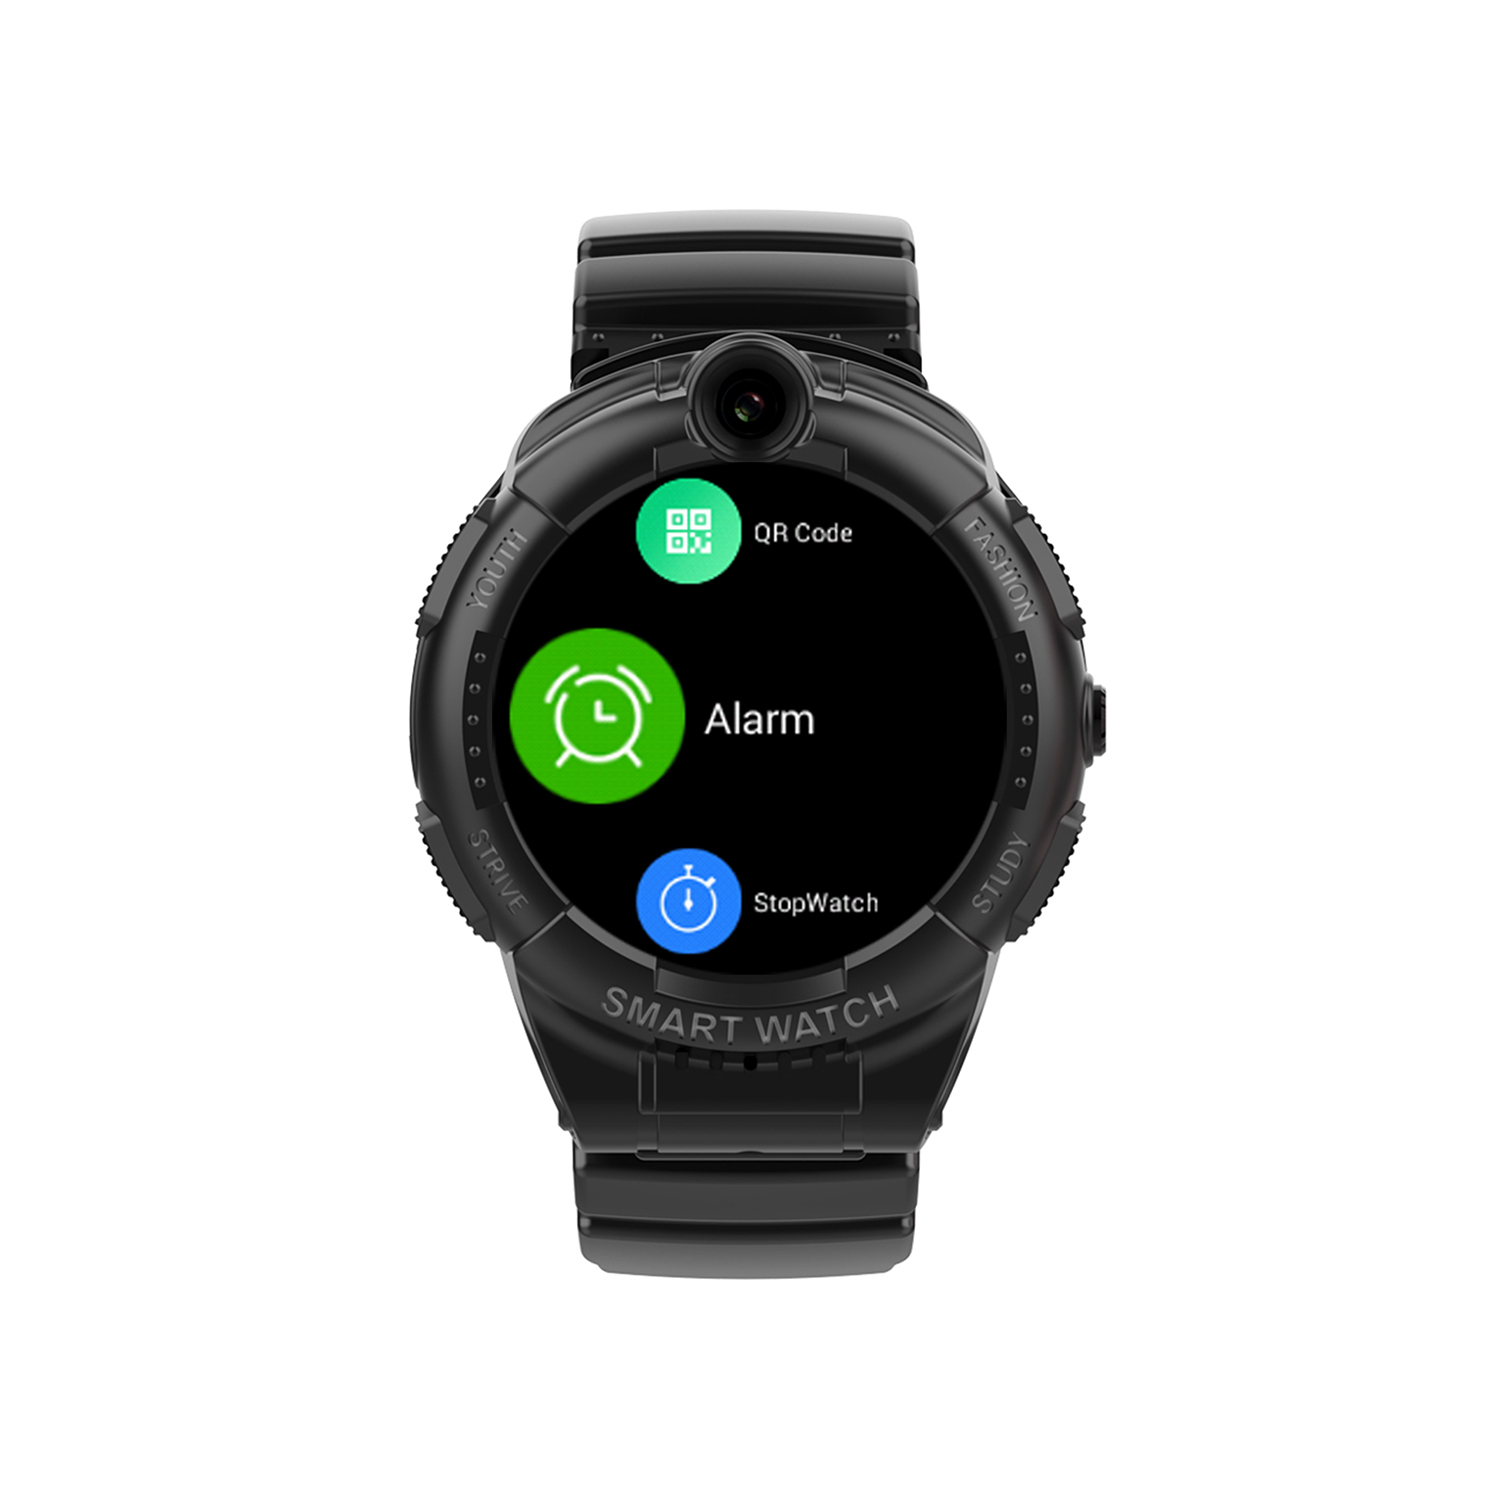 China manufacturer IP67 waterproof 4G WIFI Kids security Smart GPS Watch Tracker with 360 degree rotation Dual camera for Free Global Video call D40U